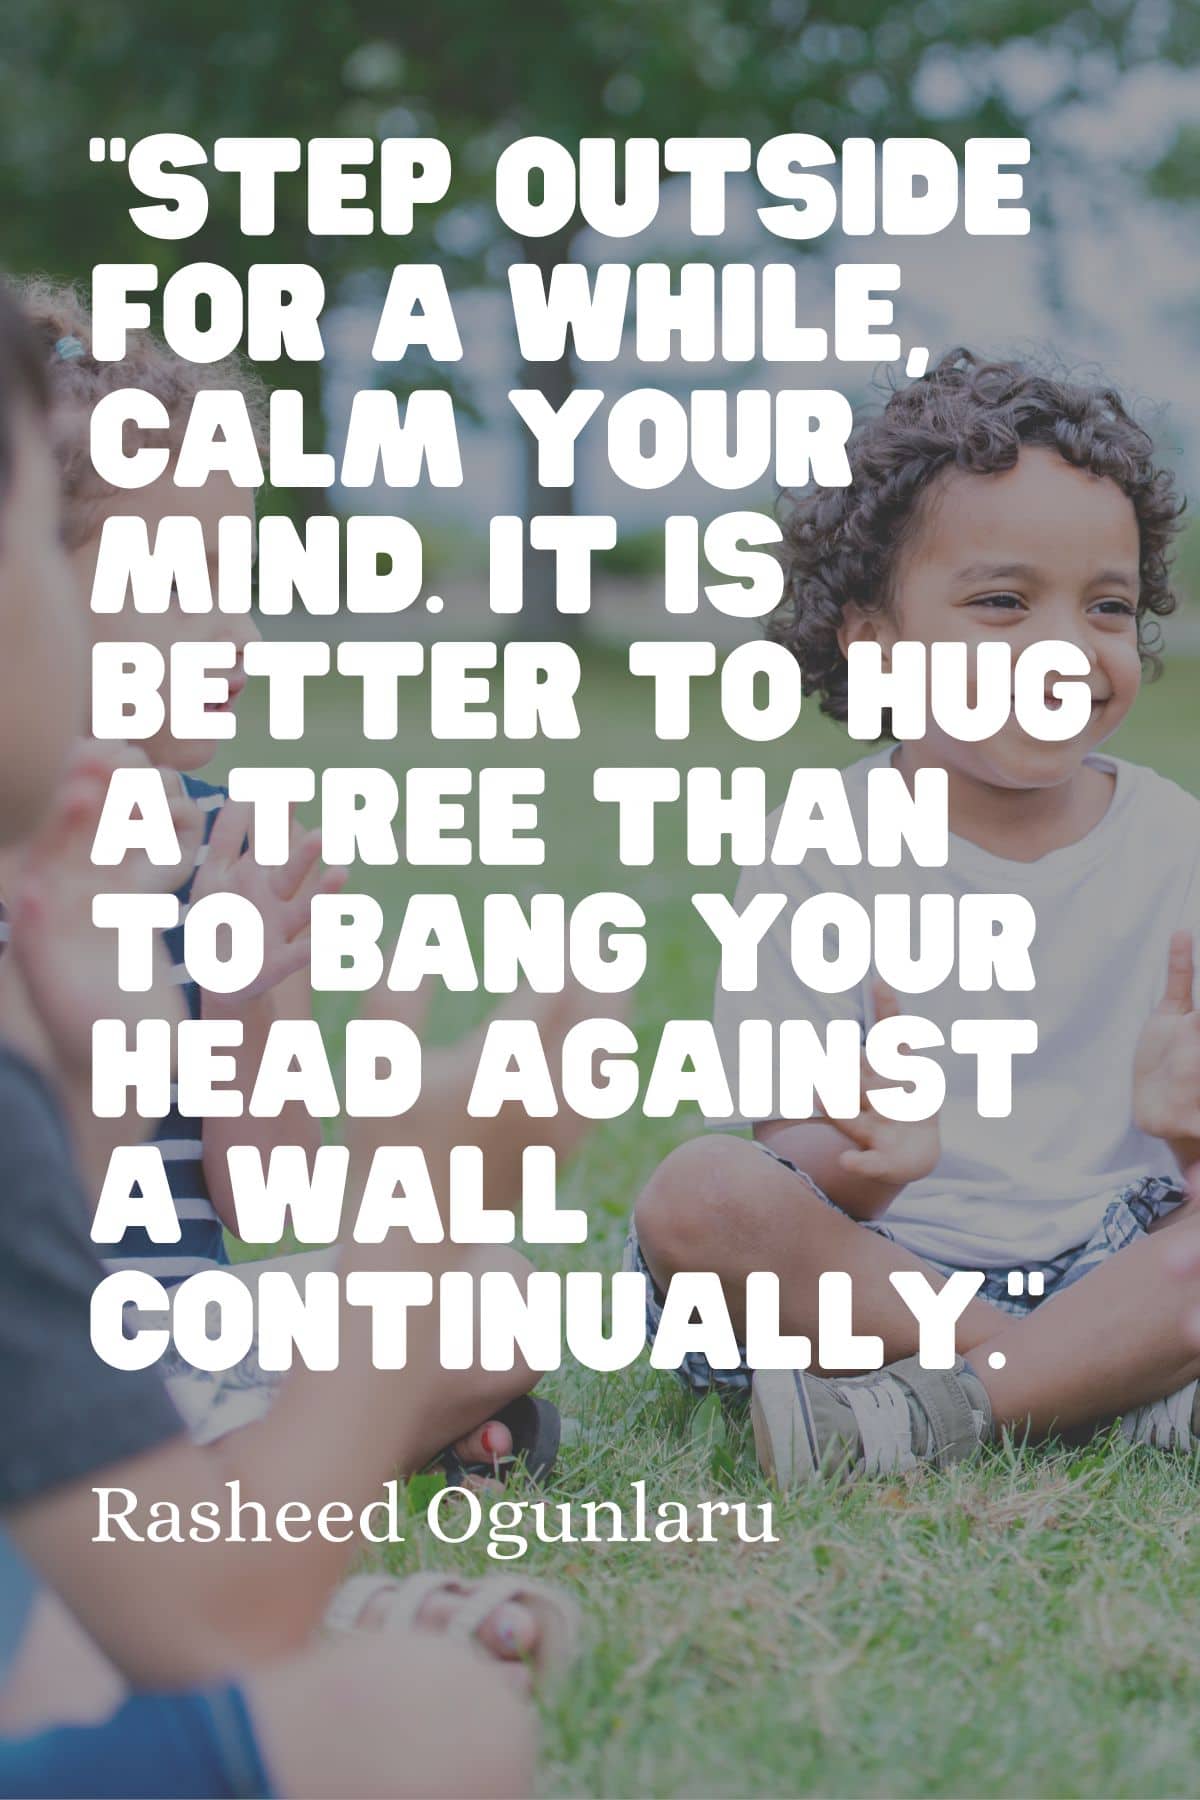 Step outside for a while, calm your mind. It is better to hug a tree than bang your head against a wall continually. Mindfulness quote for kids.